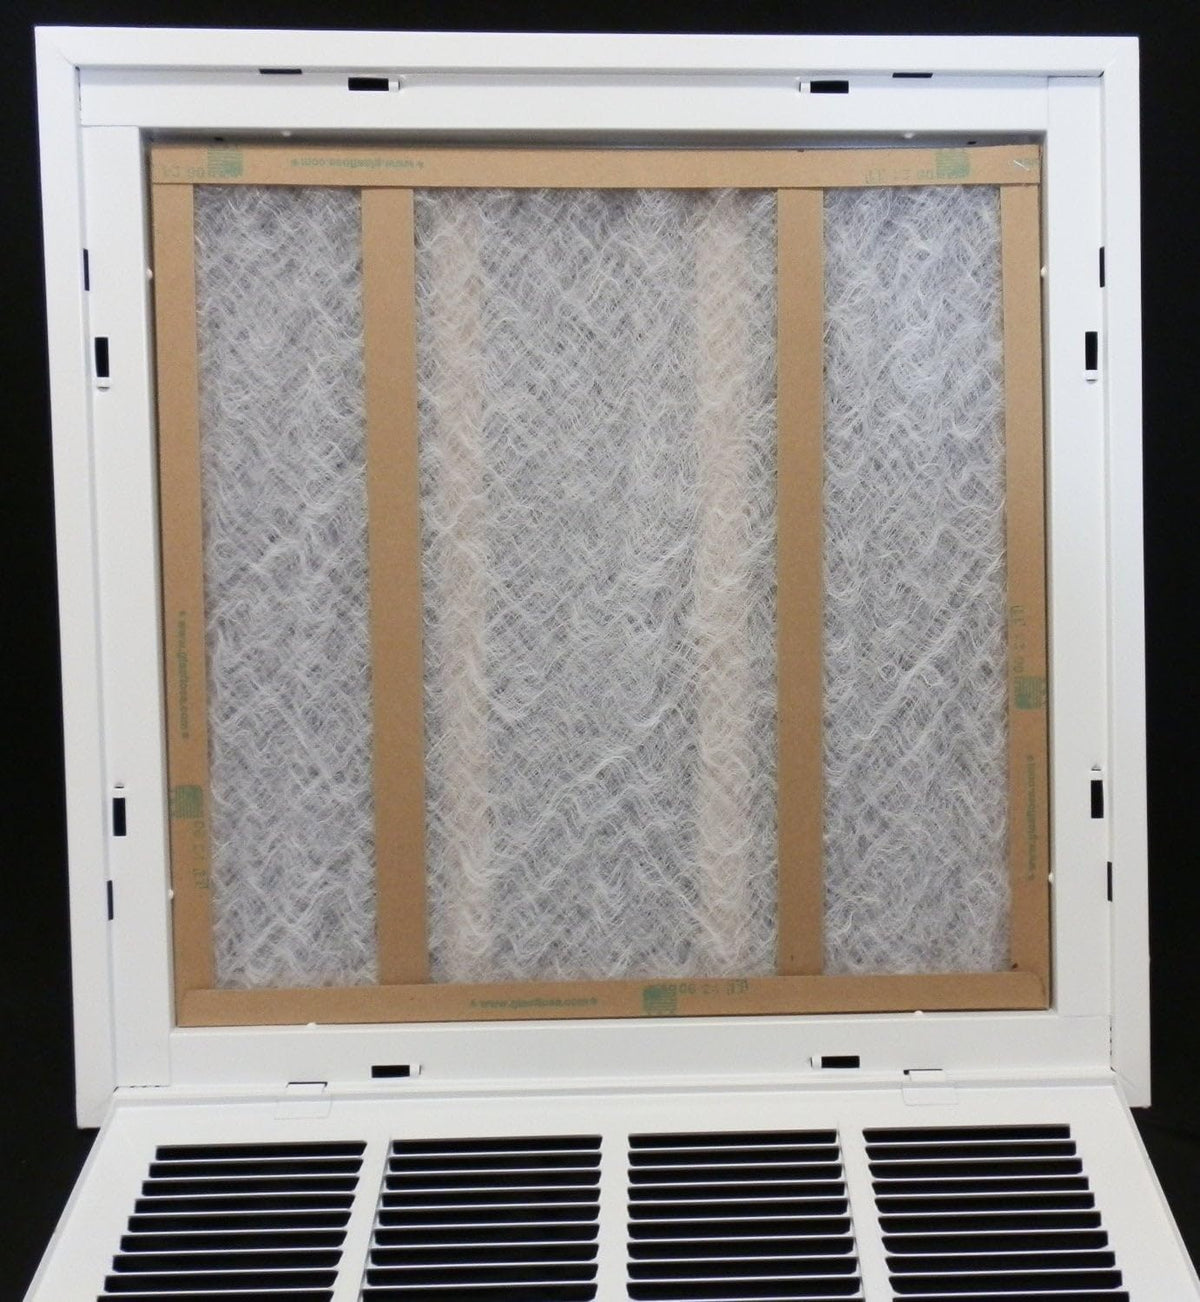 8&quot; X 6&quot; Steel Return Air Filter Grille for 1&quot; Filter - Removable Frame - [Outer Dimensions: 10 5/8&quot; X 8 5/8&quot;]